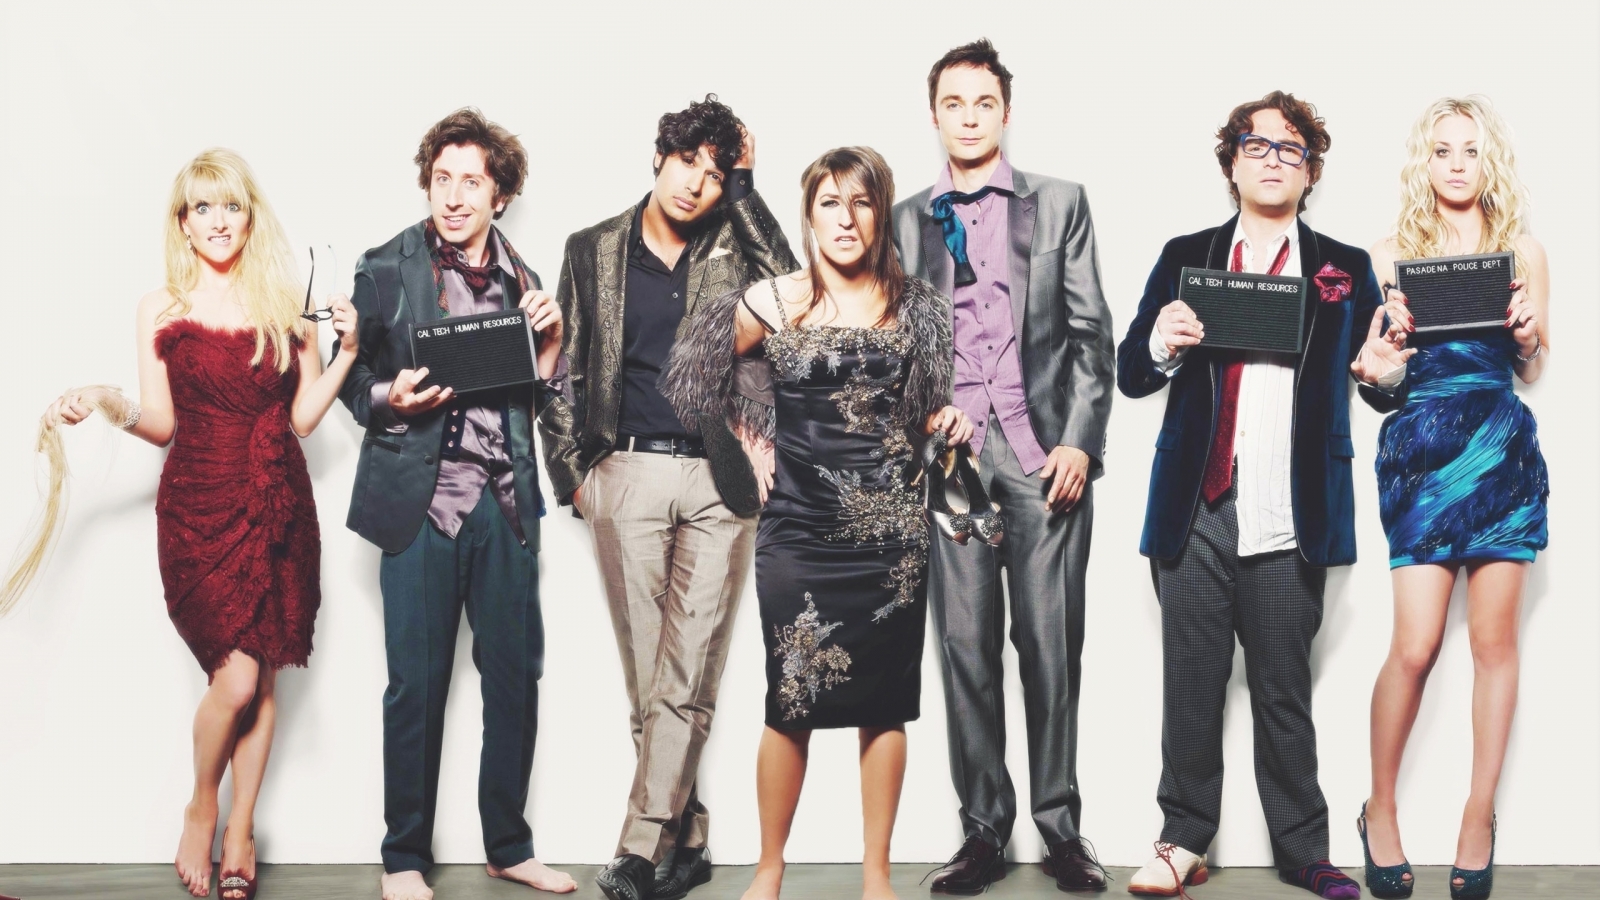 The Big Bang Theory Cast for 1600 x 900 HDTV resolution